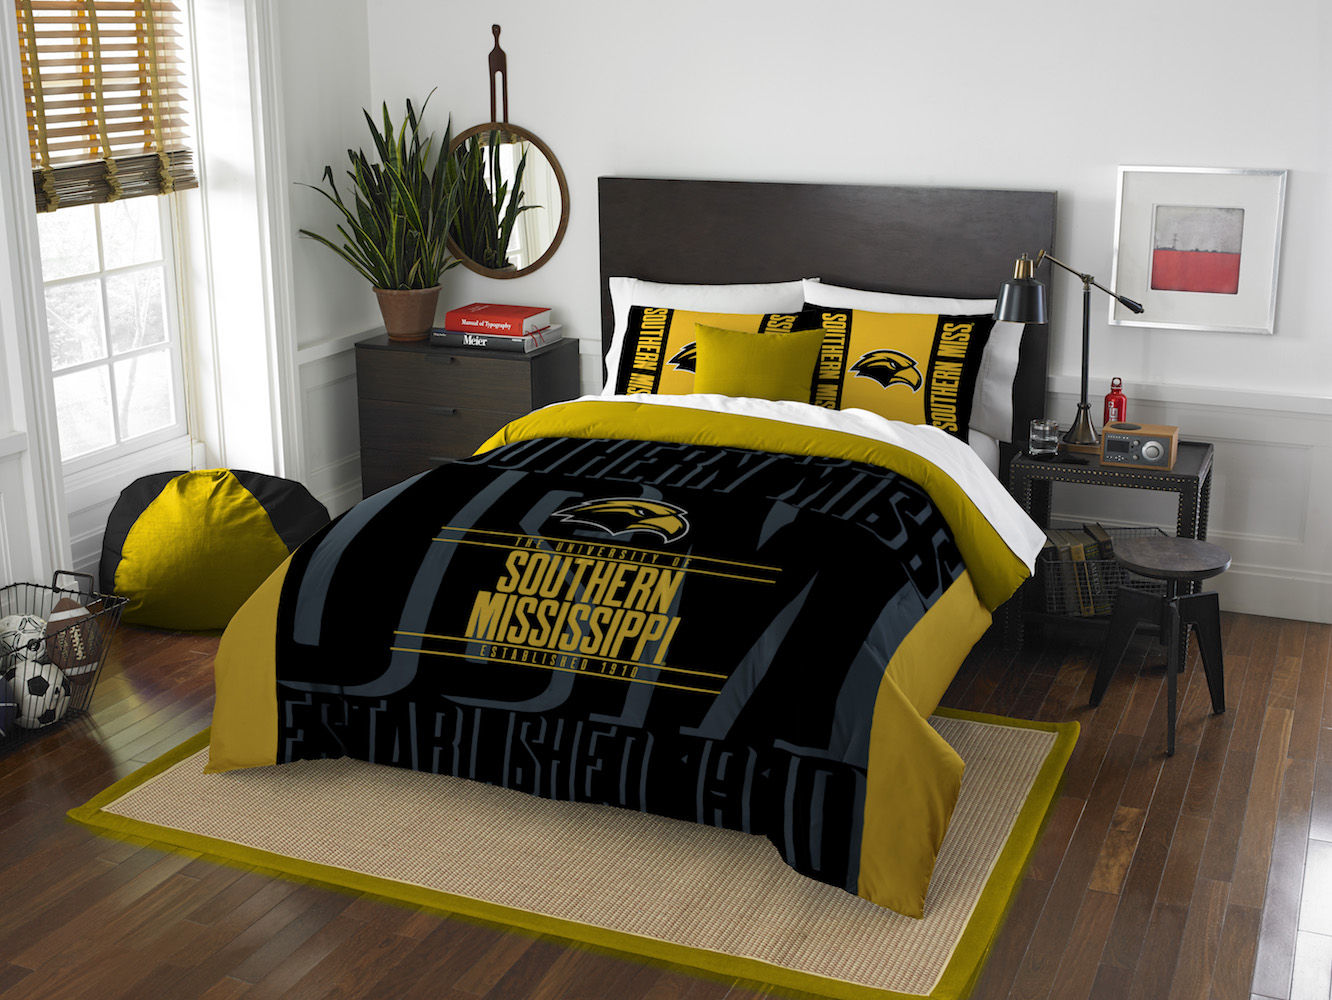 Southern Mississippi Golden Eagles QUEEN/FULL size Comforter and 2 Shams